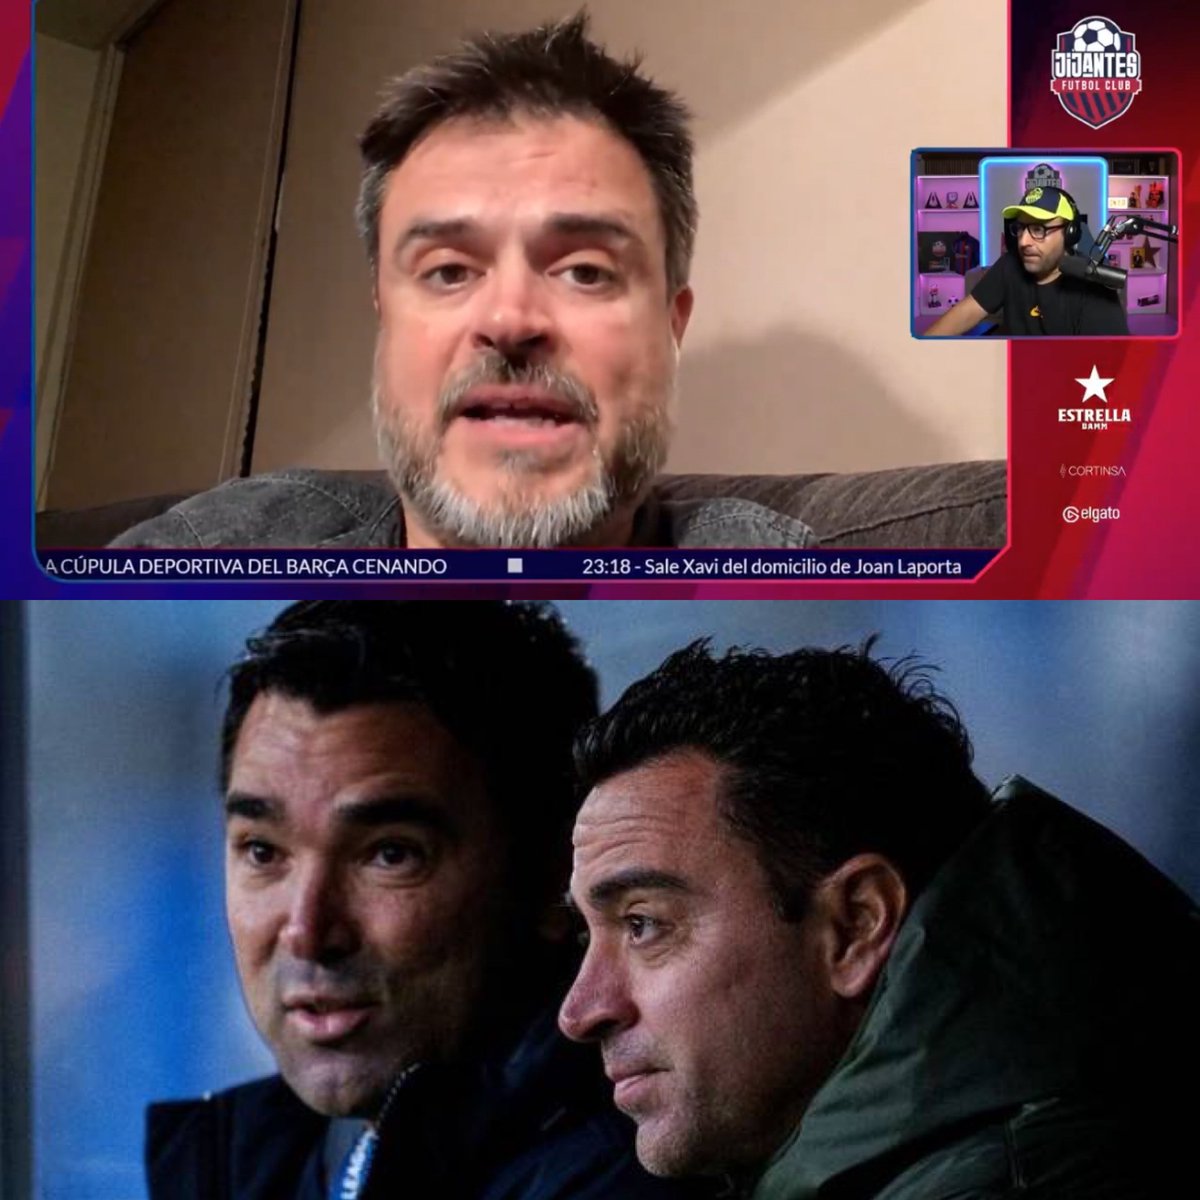 🚨🗣️ Jordi Grau (Radio Catalunya): “During the meeting between Xavi and Deco they talked about signings and departures. There will be some unexpected and painful departures.” #fcblive